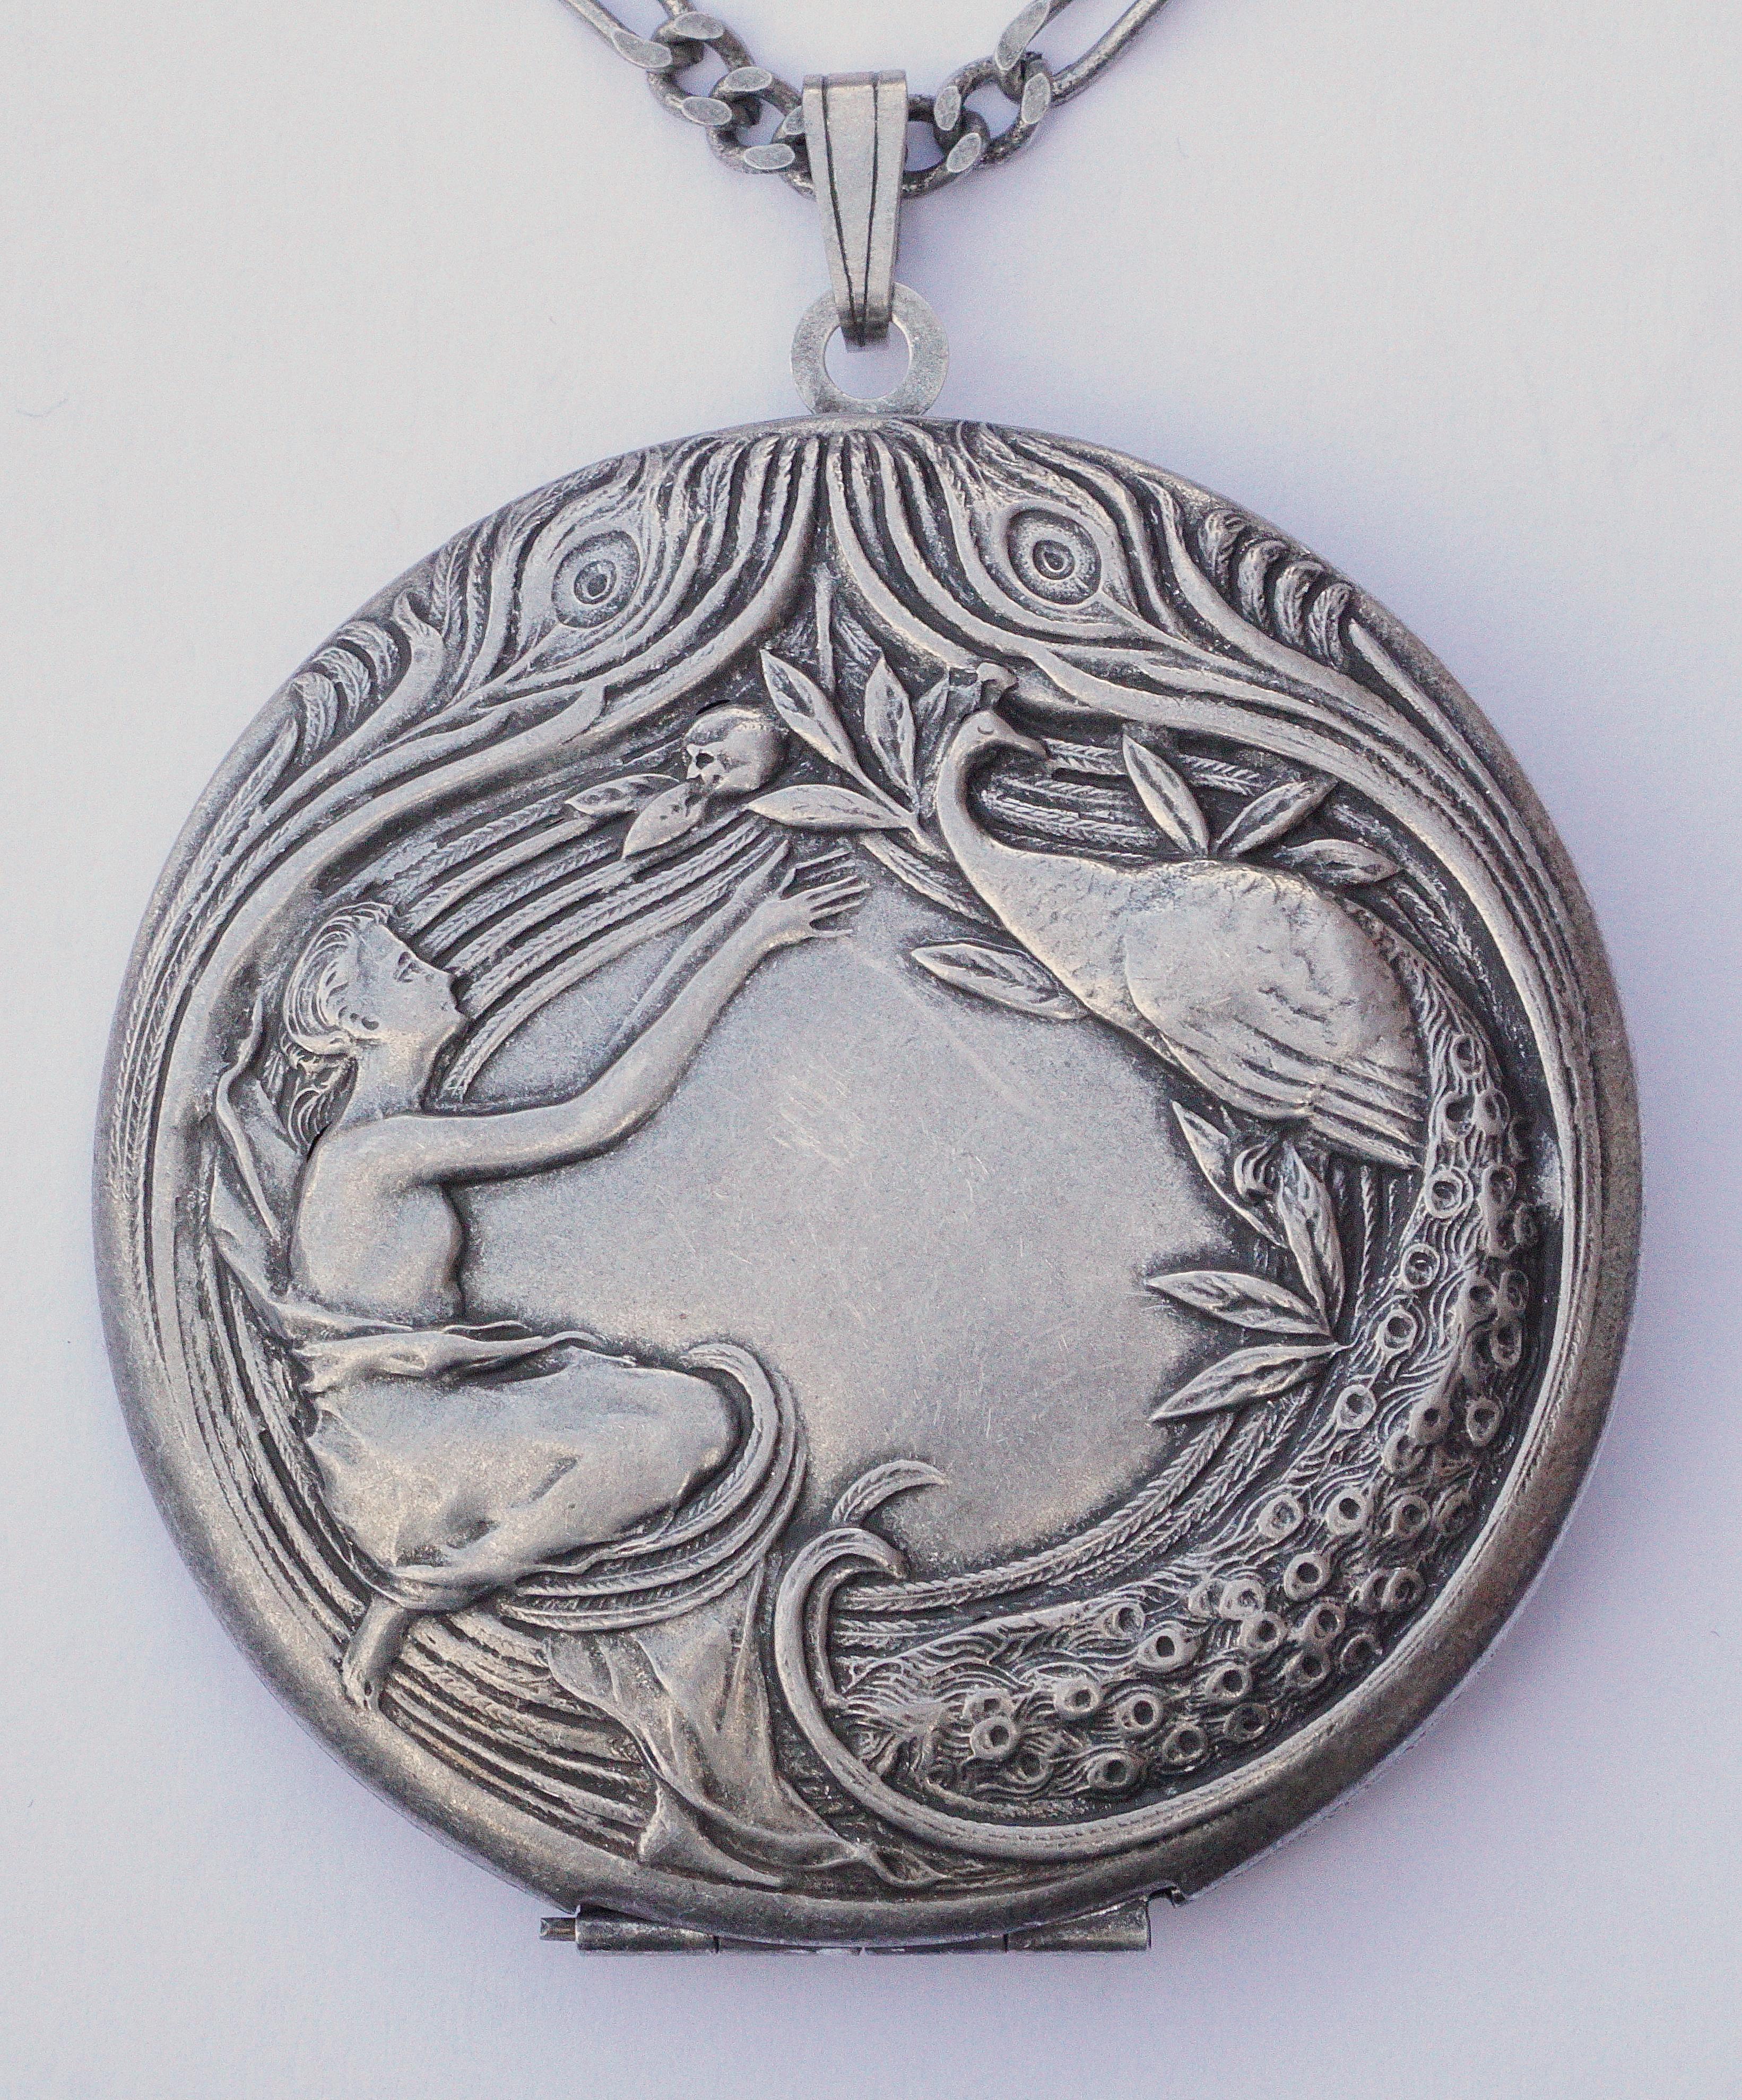 Pierre Bex silver plated art nouveau style necklace and opening locket, featuring a lovely peacock design.
The stylish curb link necklace measures 71.5cm, 28.15 inches, and is stamped PB. The large locket is diameter 5.5cm. 2.16 inches.
This is a